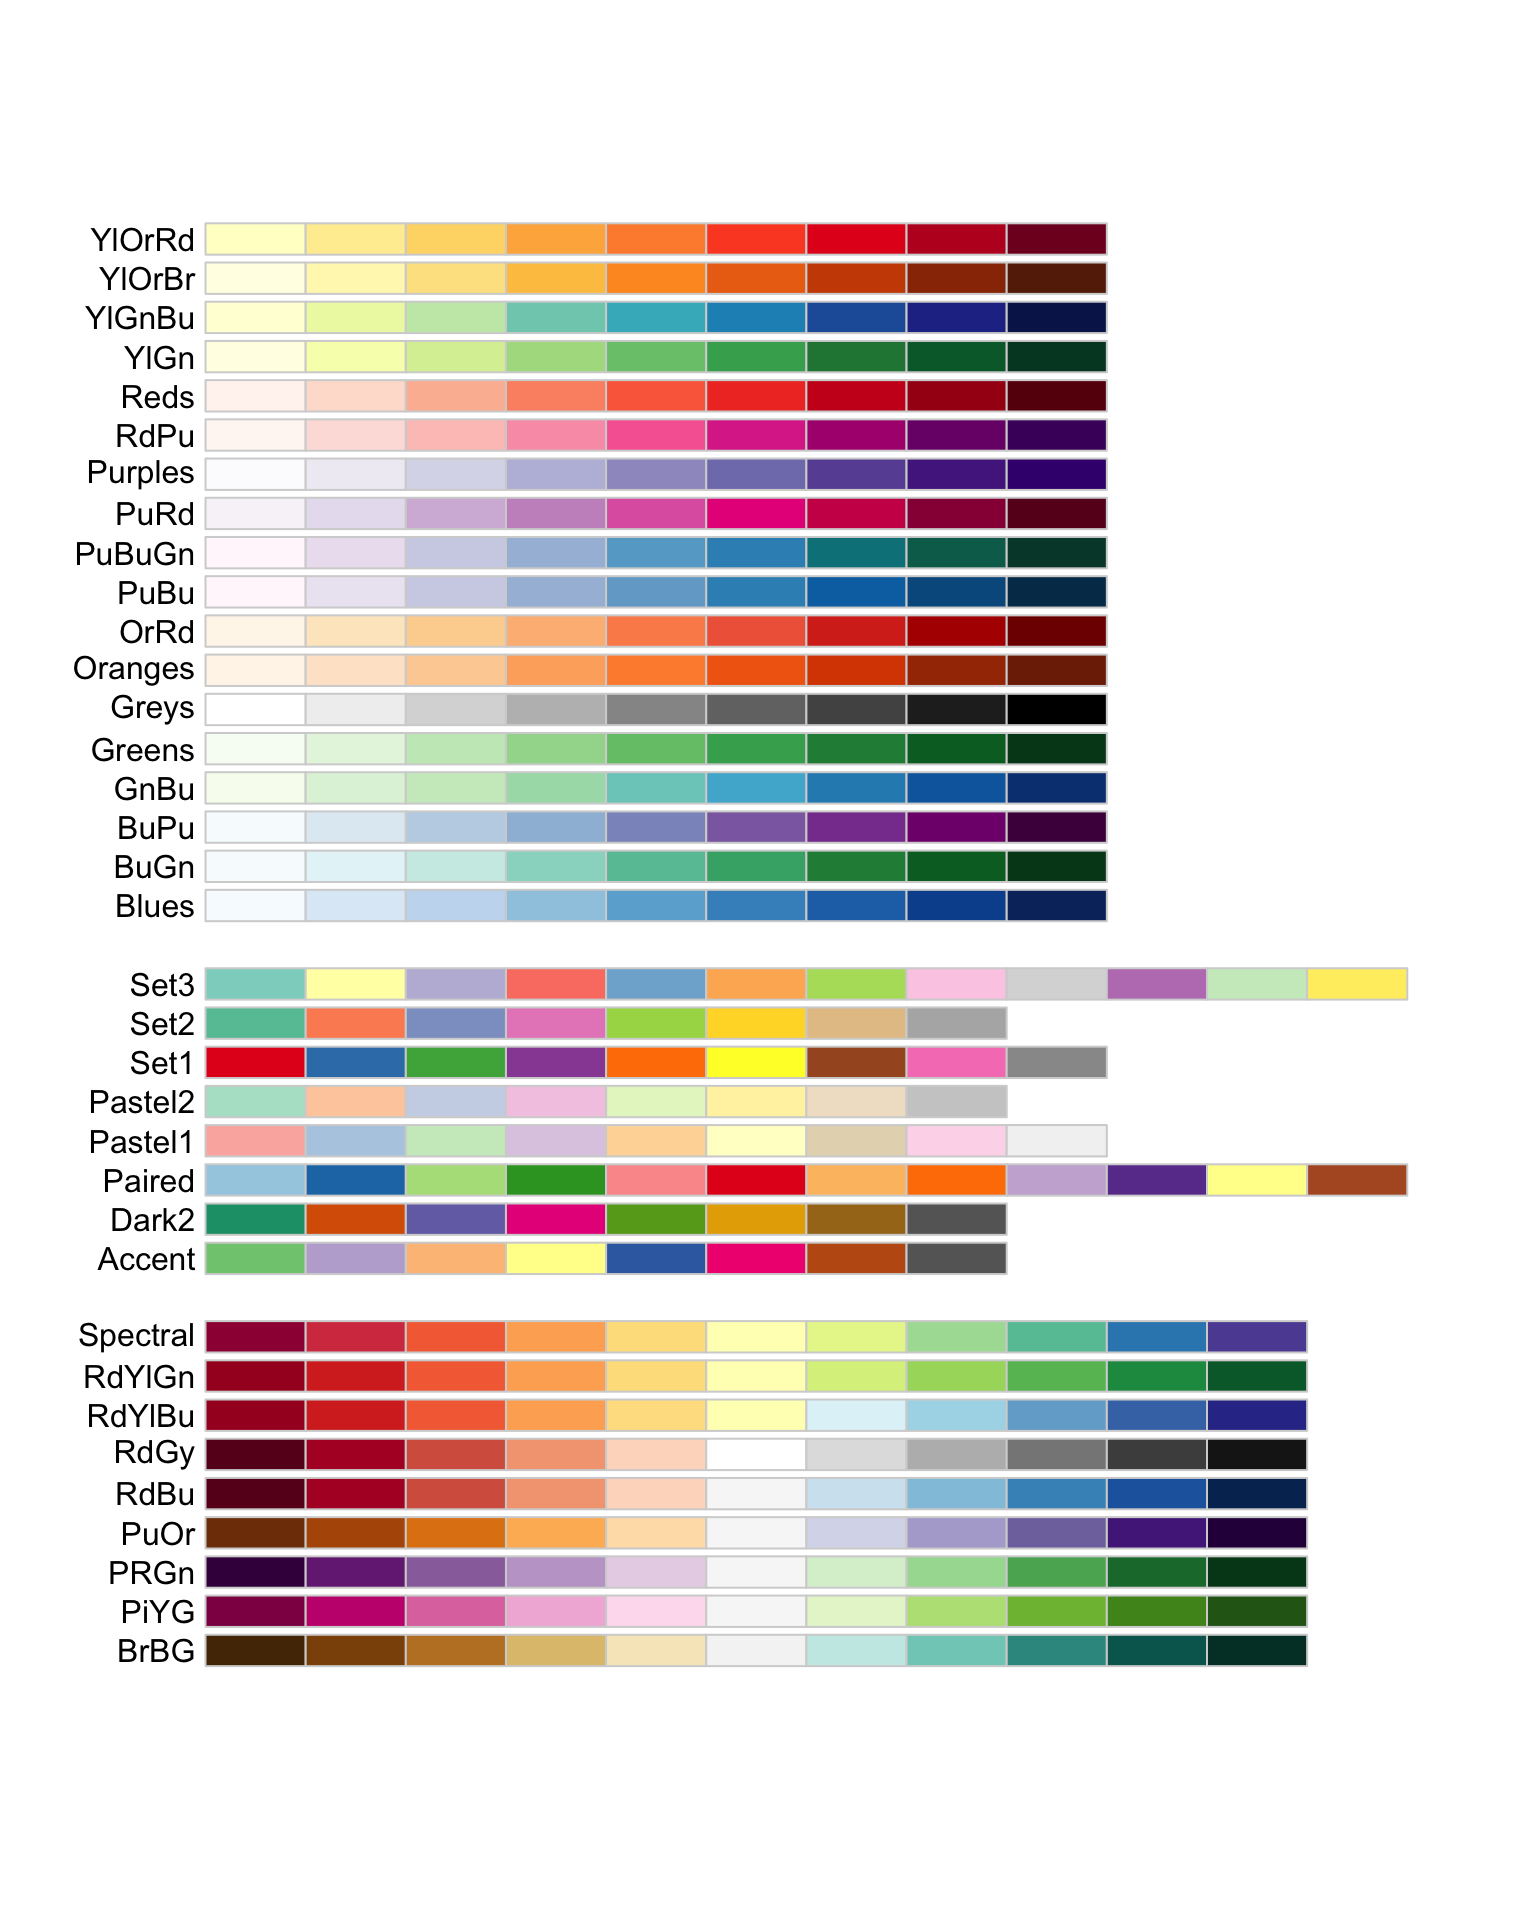 Palettes available in RColorBrewer. The first chunk  shows palettes suitable for sequential categories, the middle chunk consists of palettes suitable for nominal categories whereas the last chunk of palettes are recommended for diverging categories.